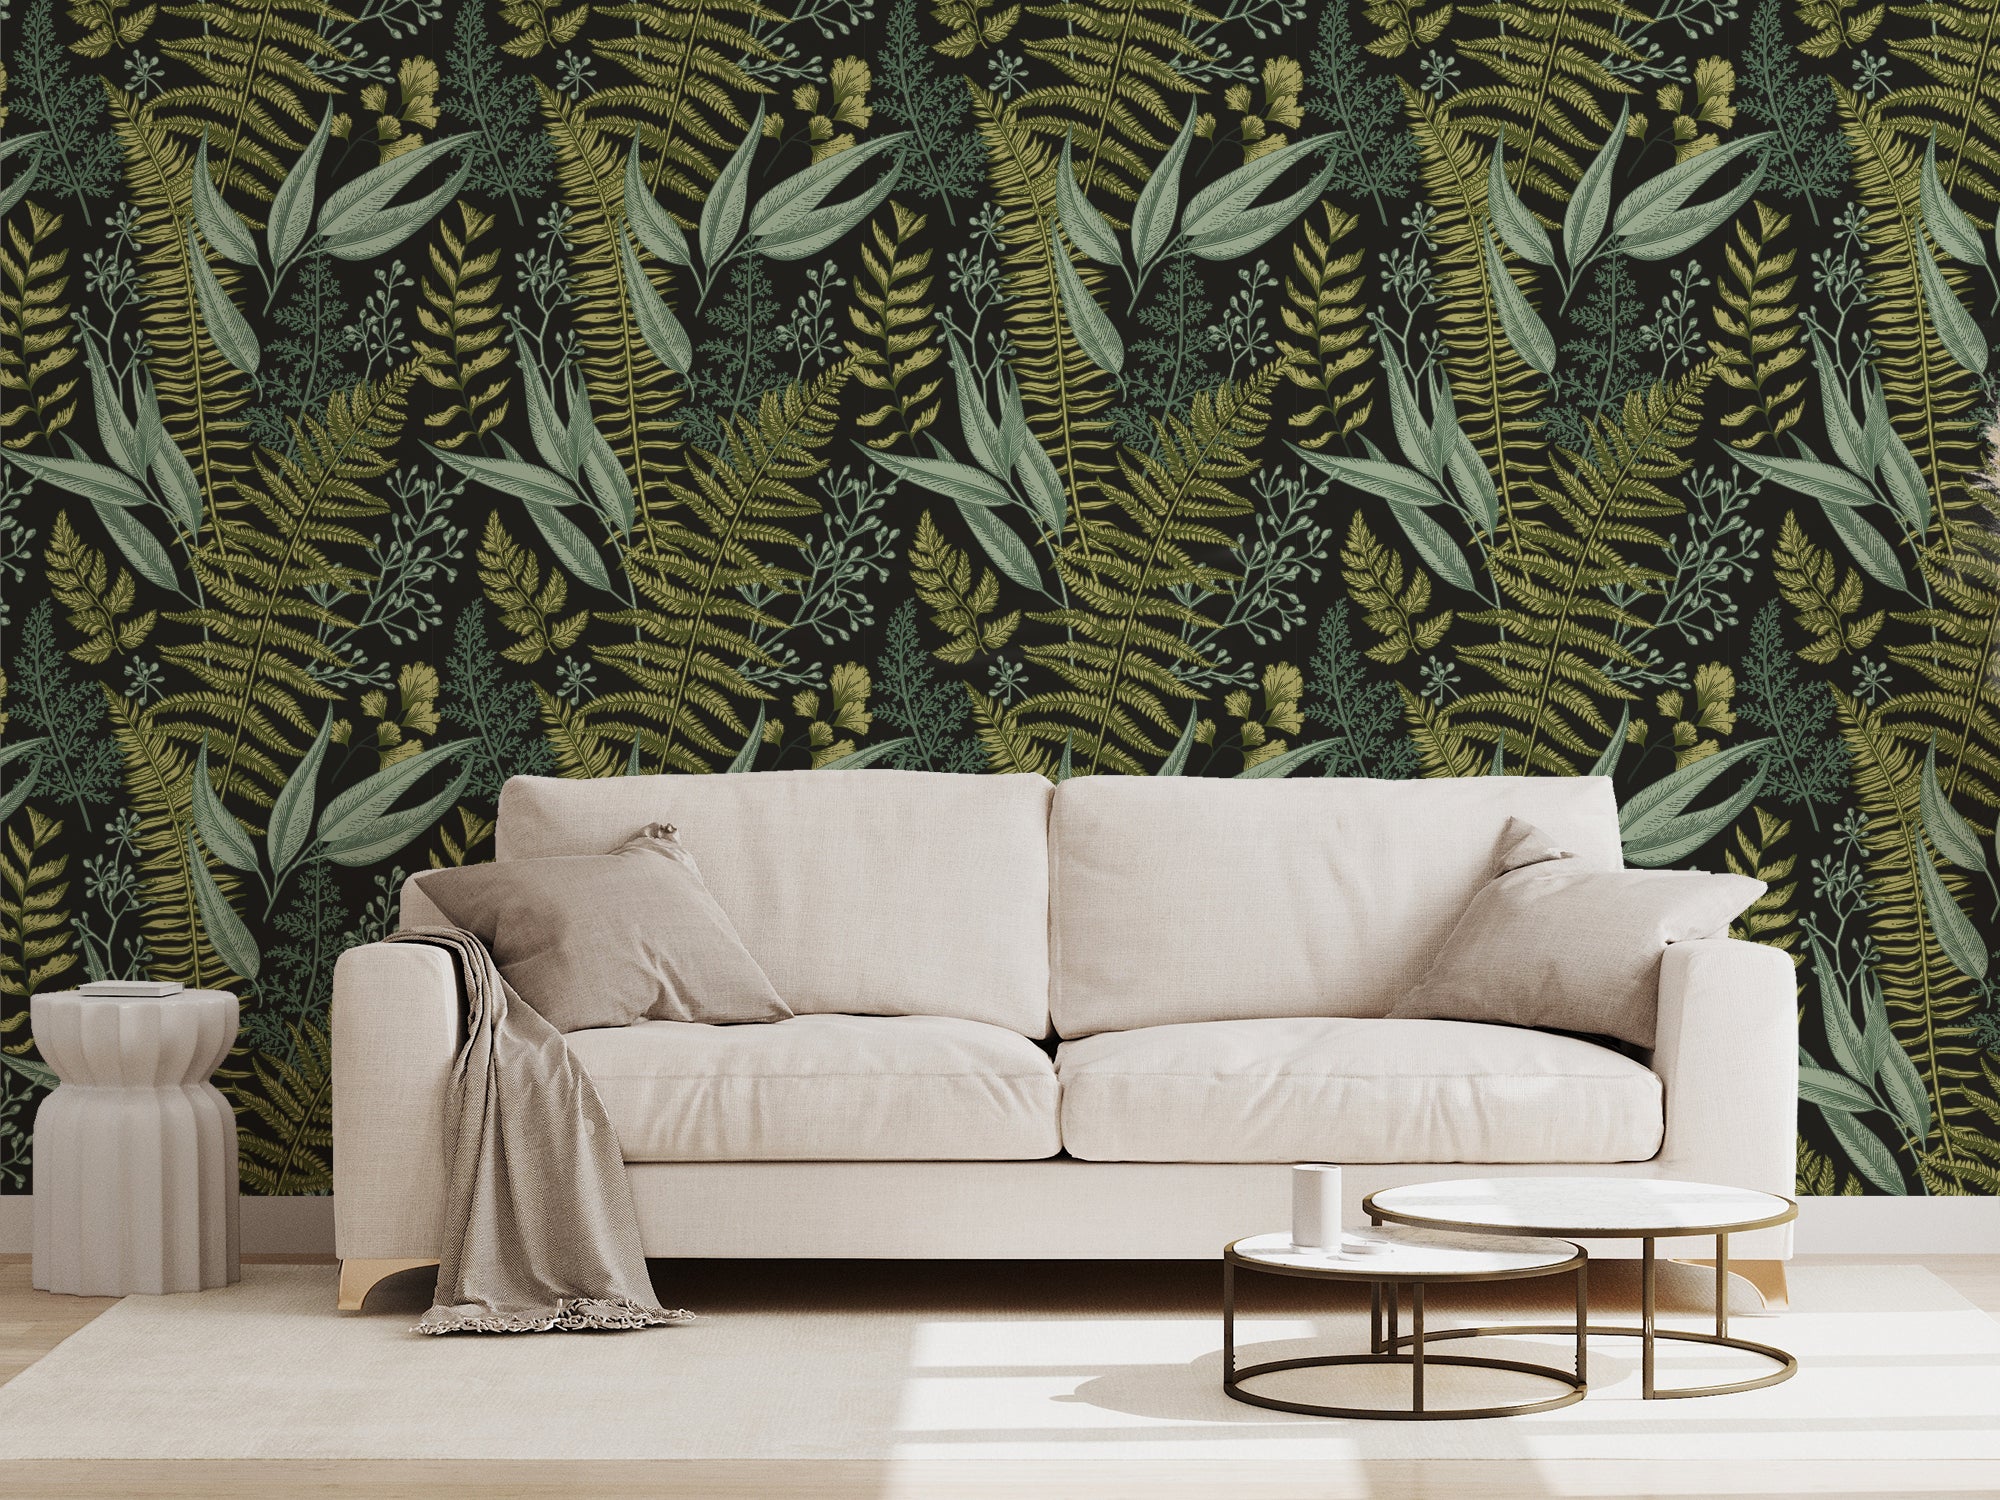 PeelStick Palm Tree Tropical Jungle Forest Removable Wallpaper  Bed Bath   Beyond  35096797